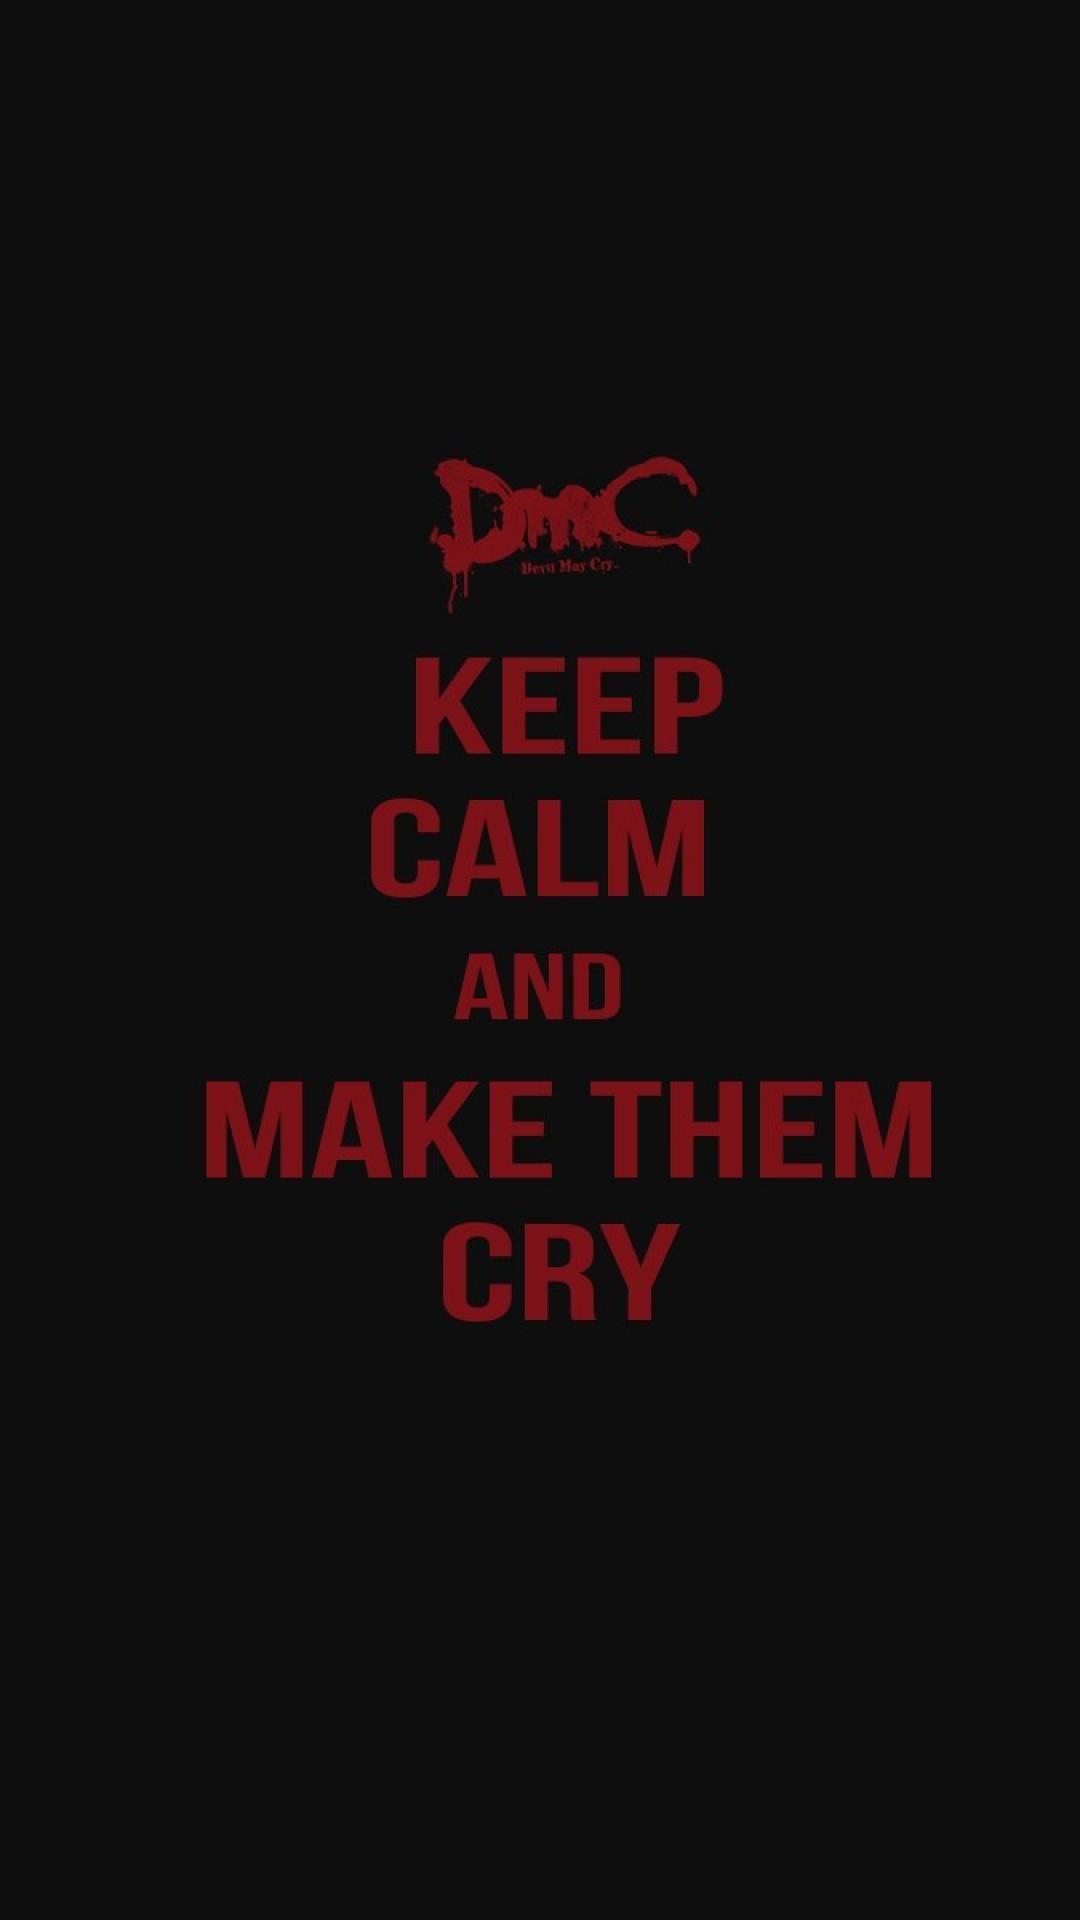 Devil may cry keep calm and dmc wallpaper